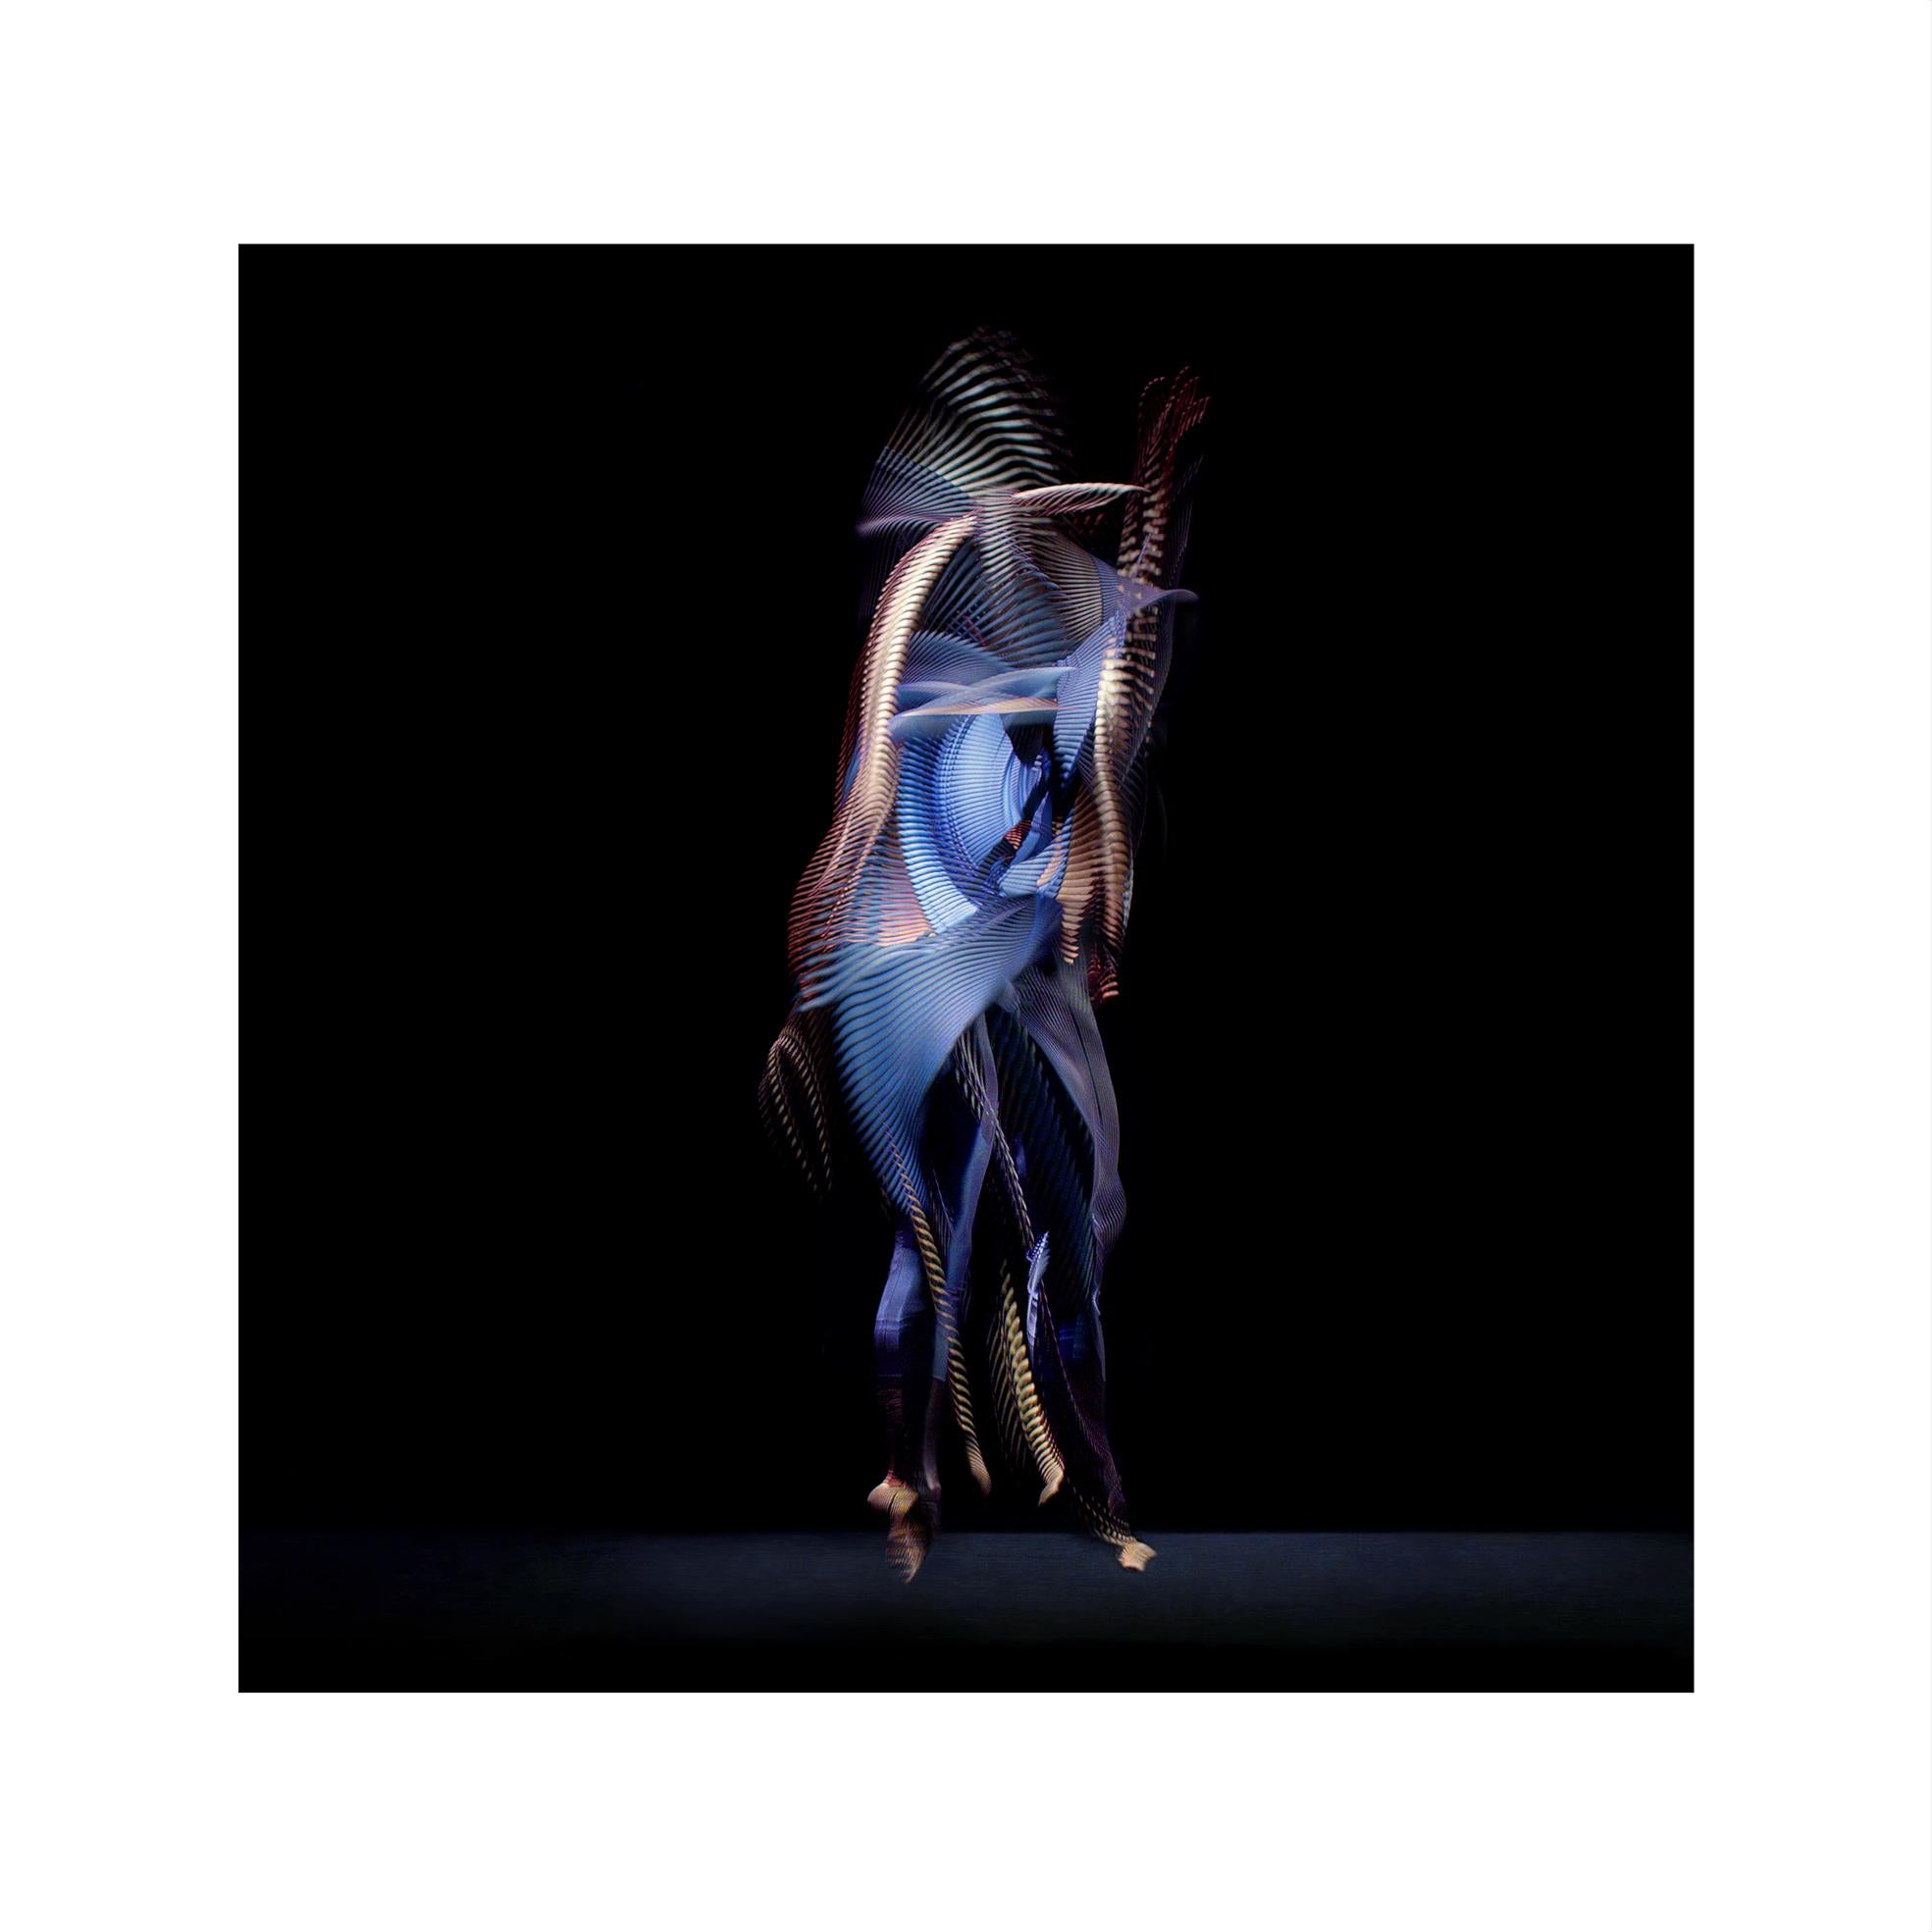 Abstract Dancers, Dark Blue 5, 2019 by Giles Revell - Photography, Ballet, Black